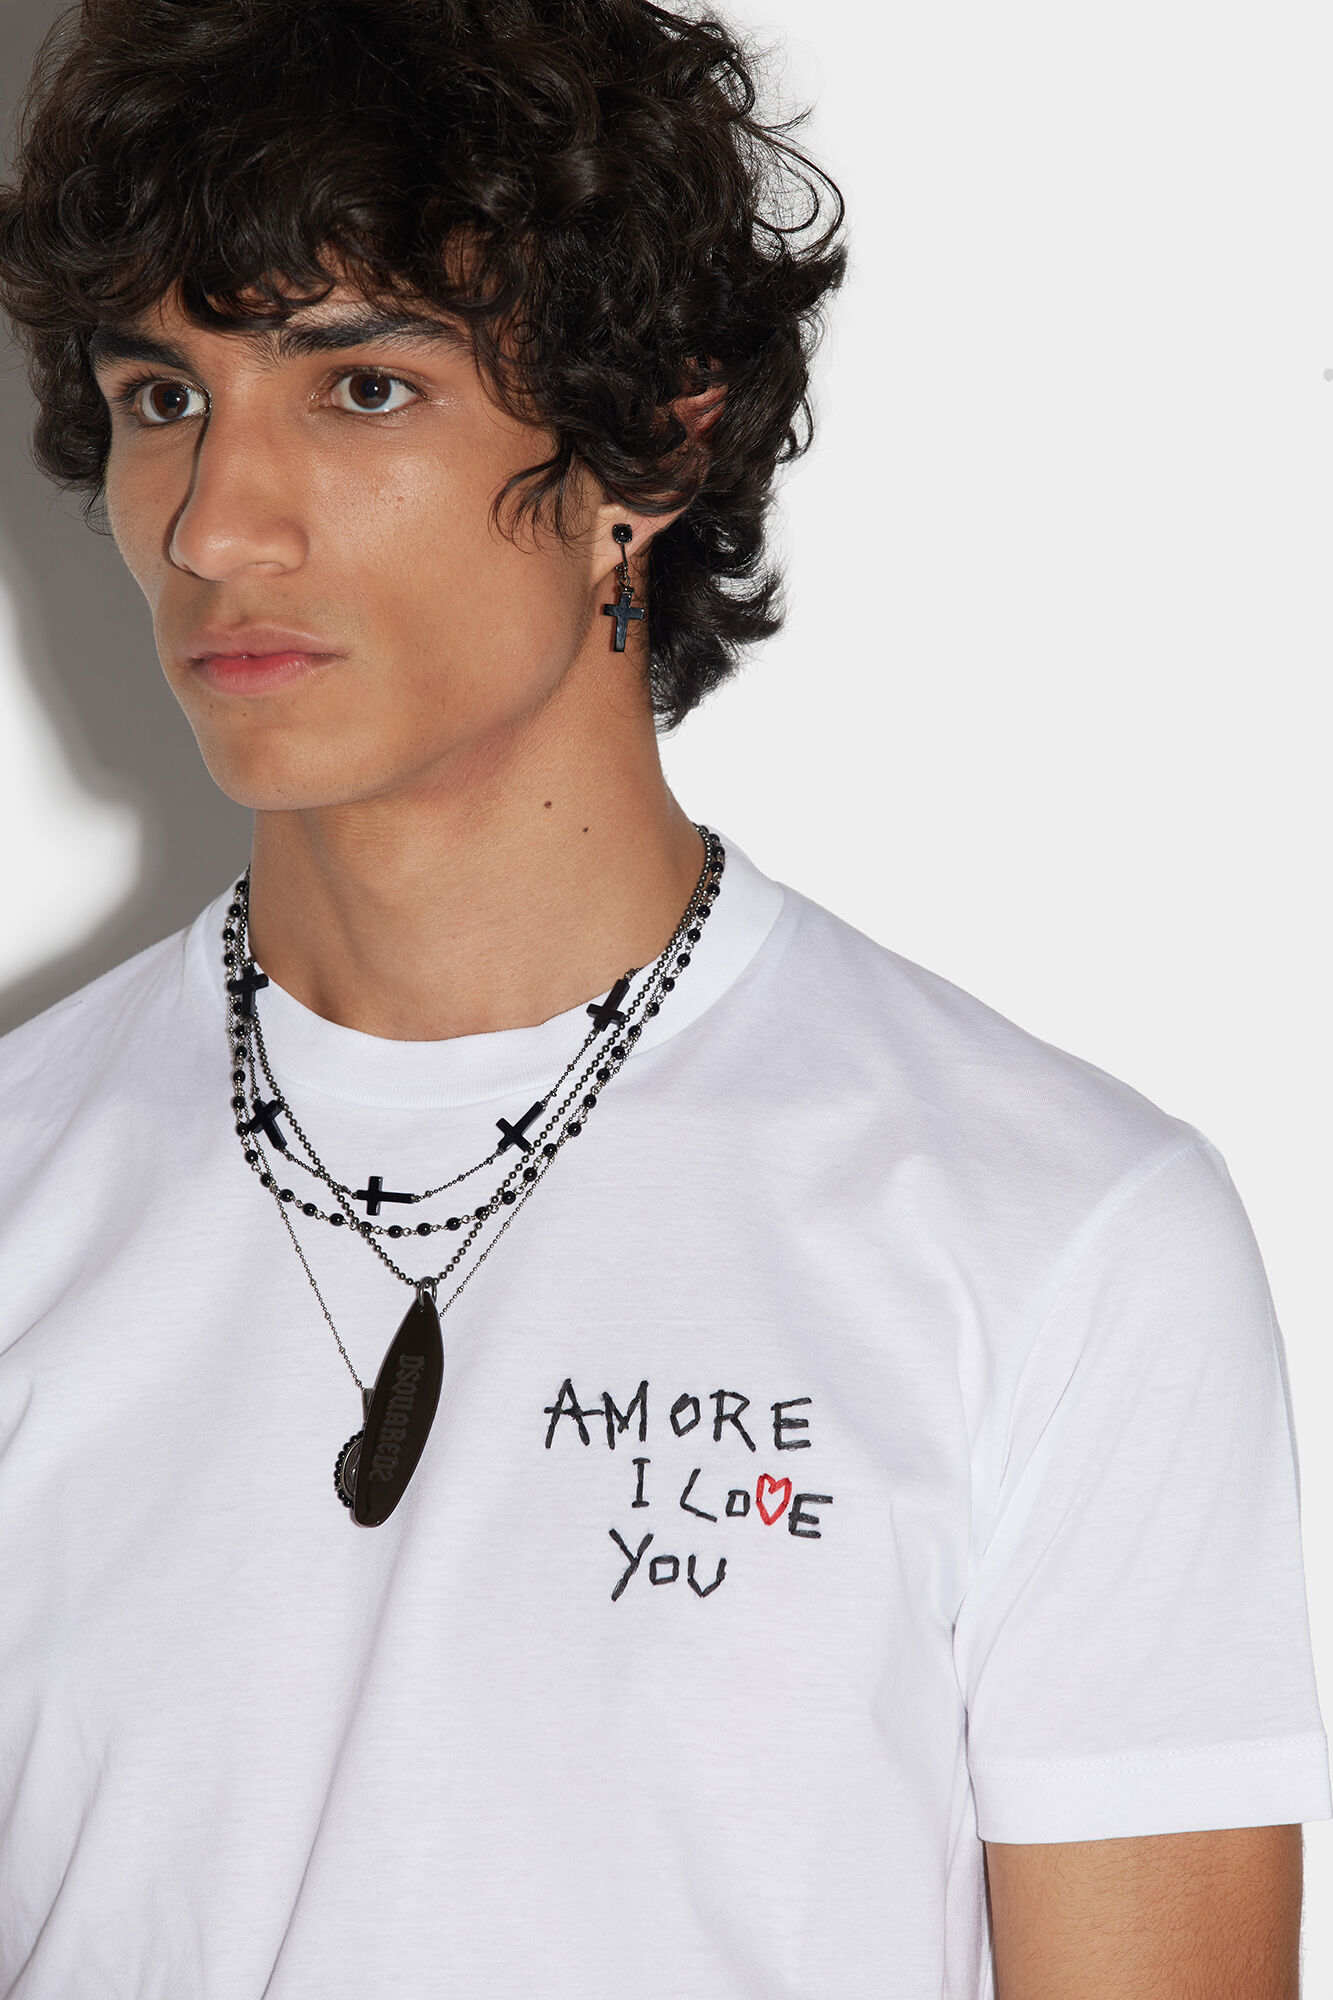 Amore I Love You Cool T-shirt